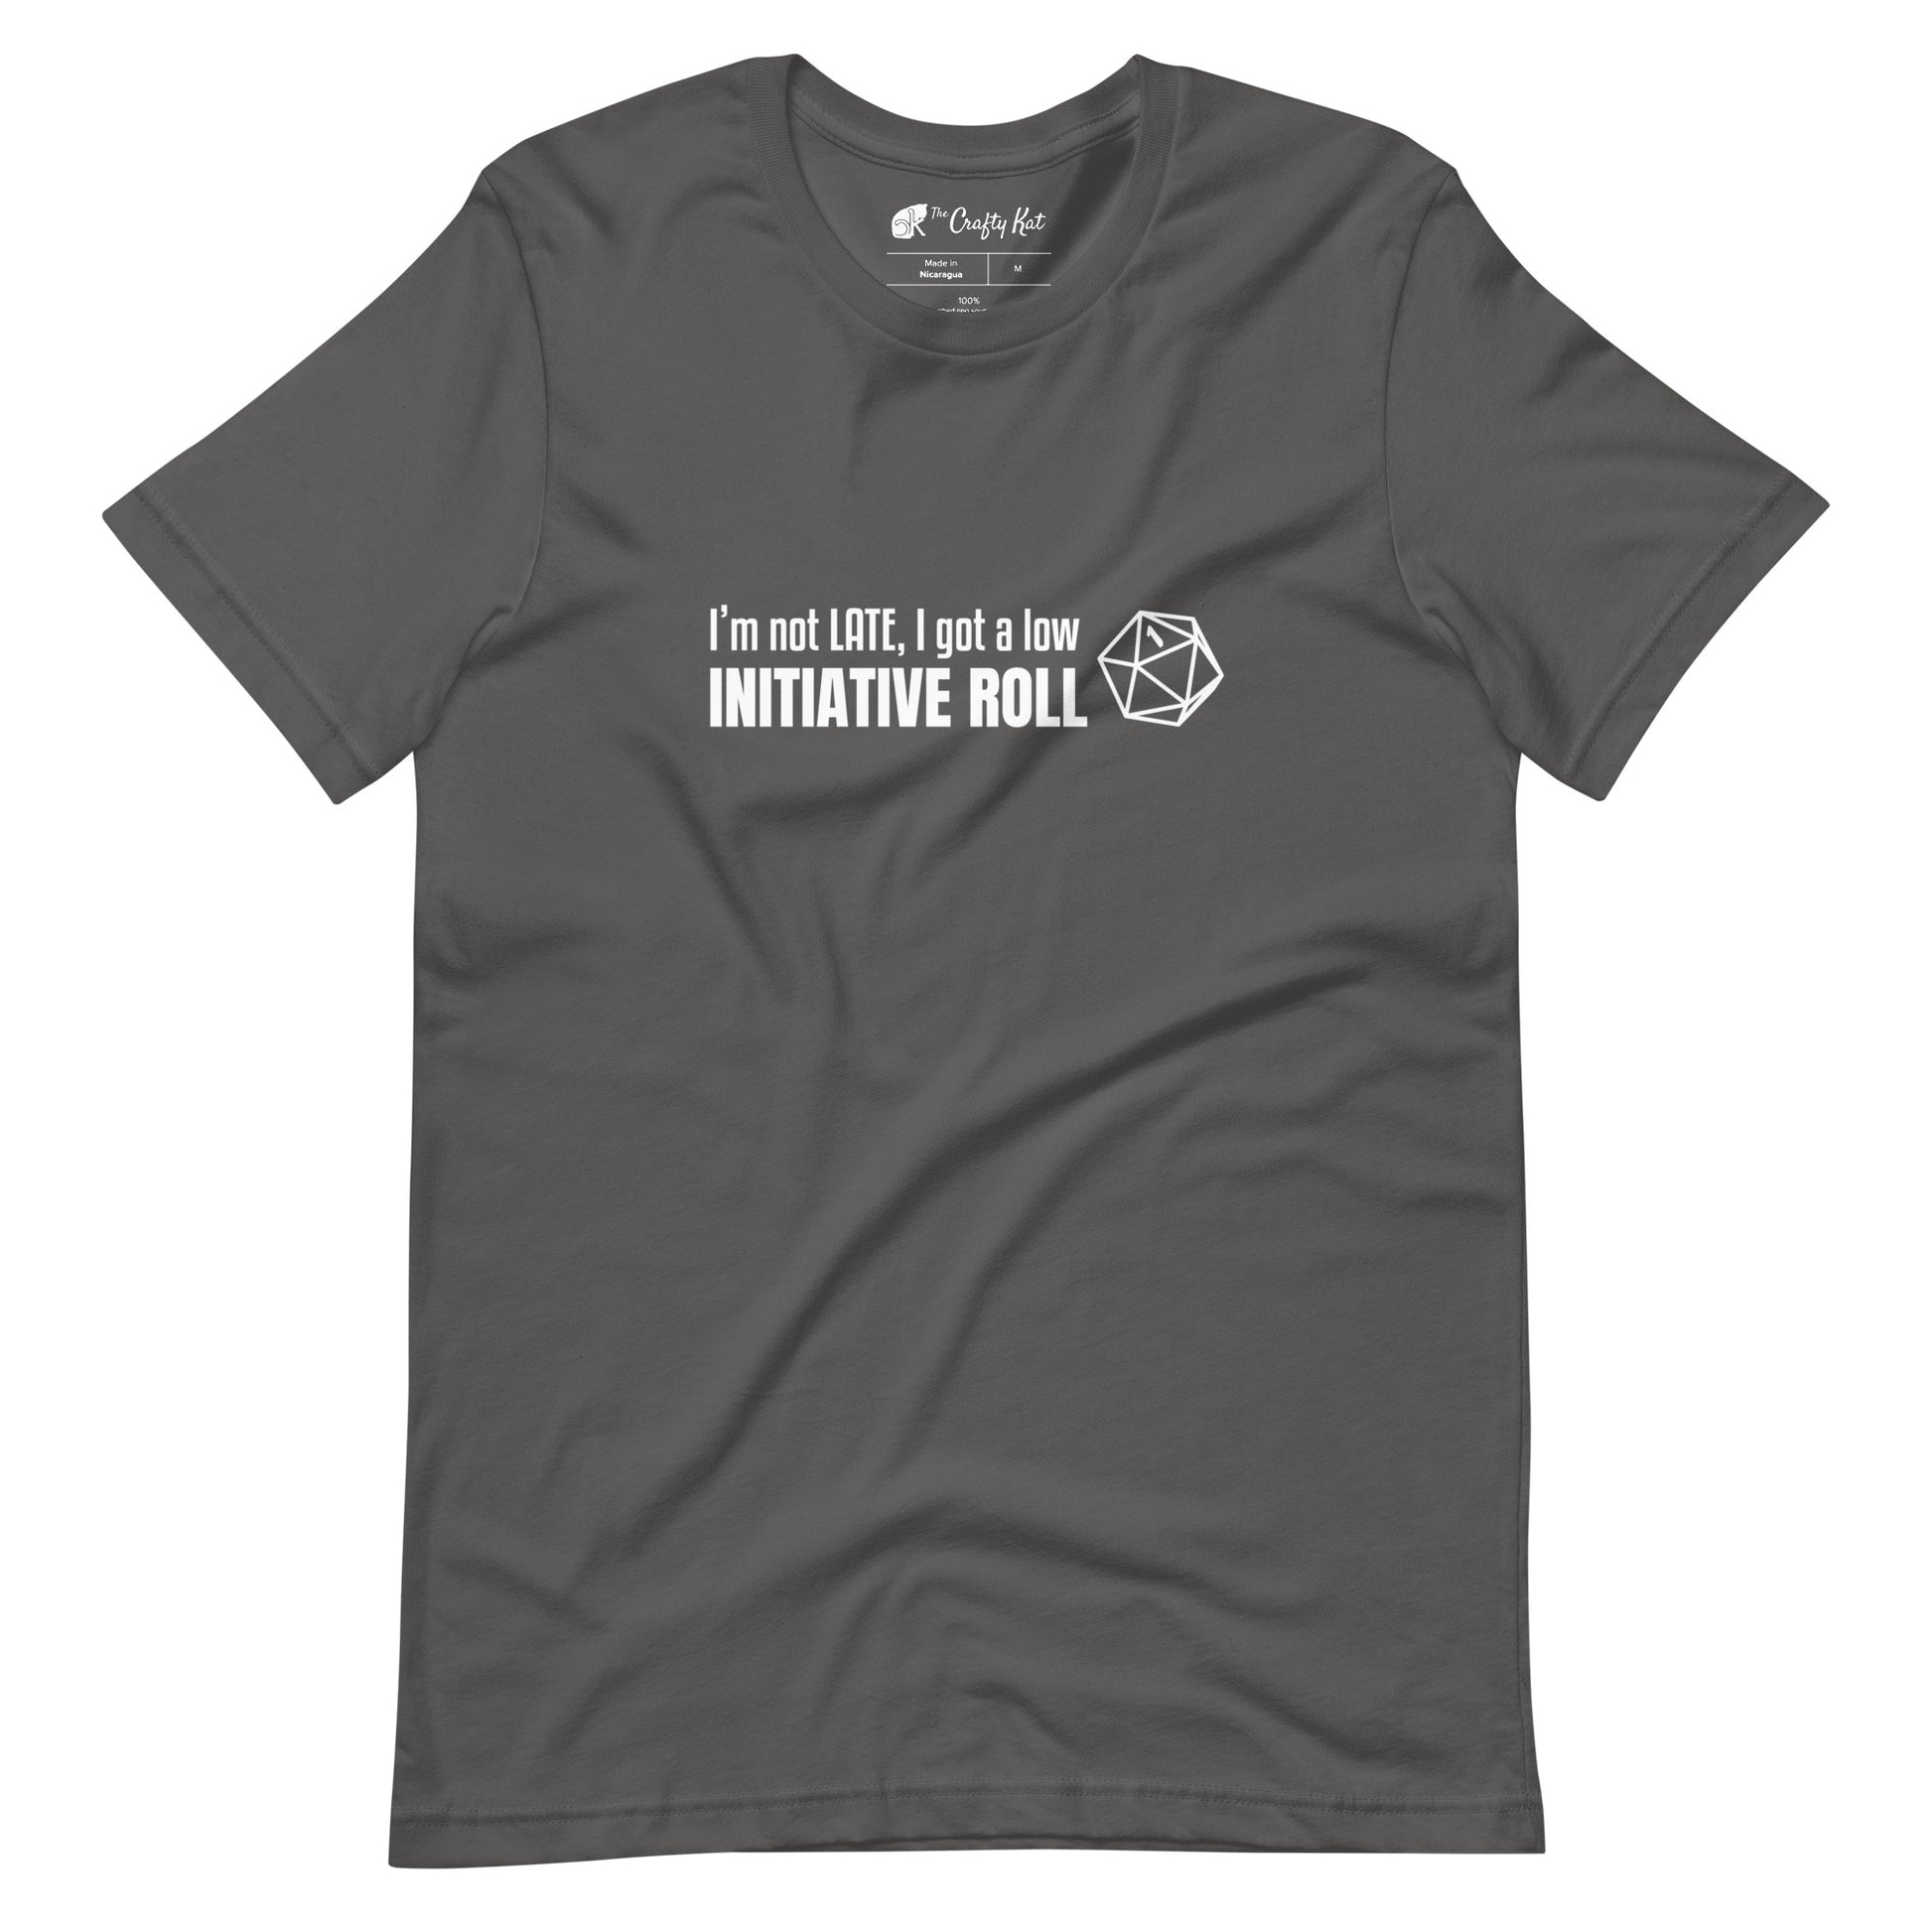 Asphalt grey unisex t-shirt with a graphic of a d20 (twenty-sided die) showing a roll of "1" and text: "I'm not LATE, I got a low INITIATIVE ROLL"